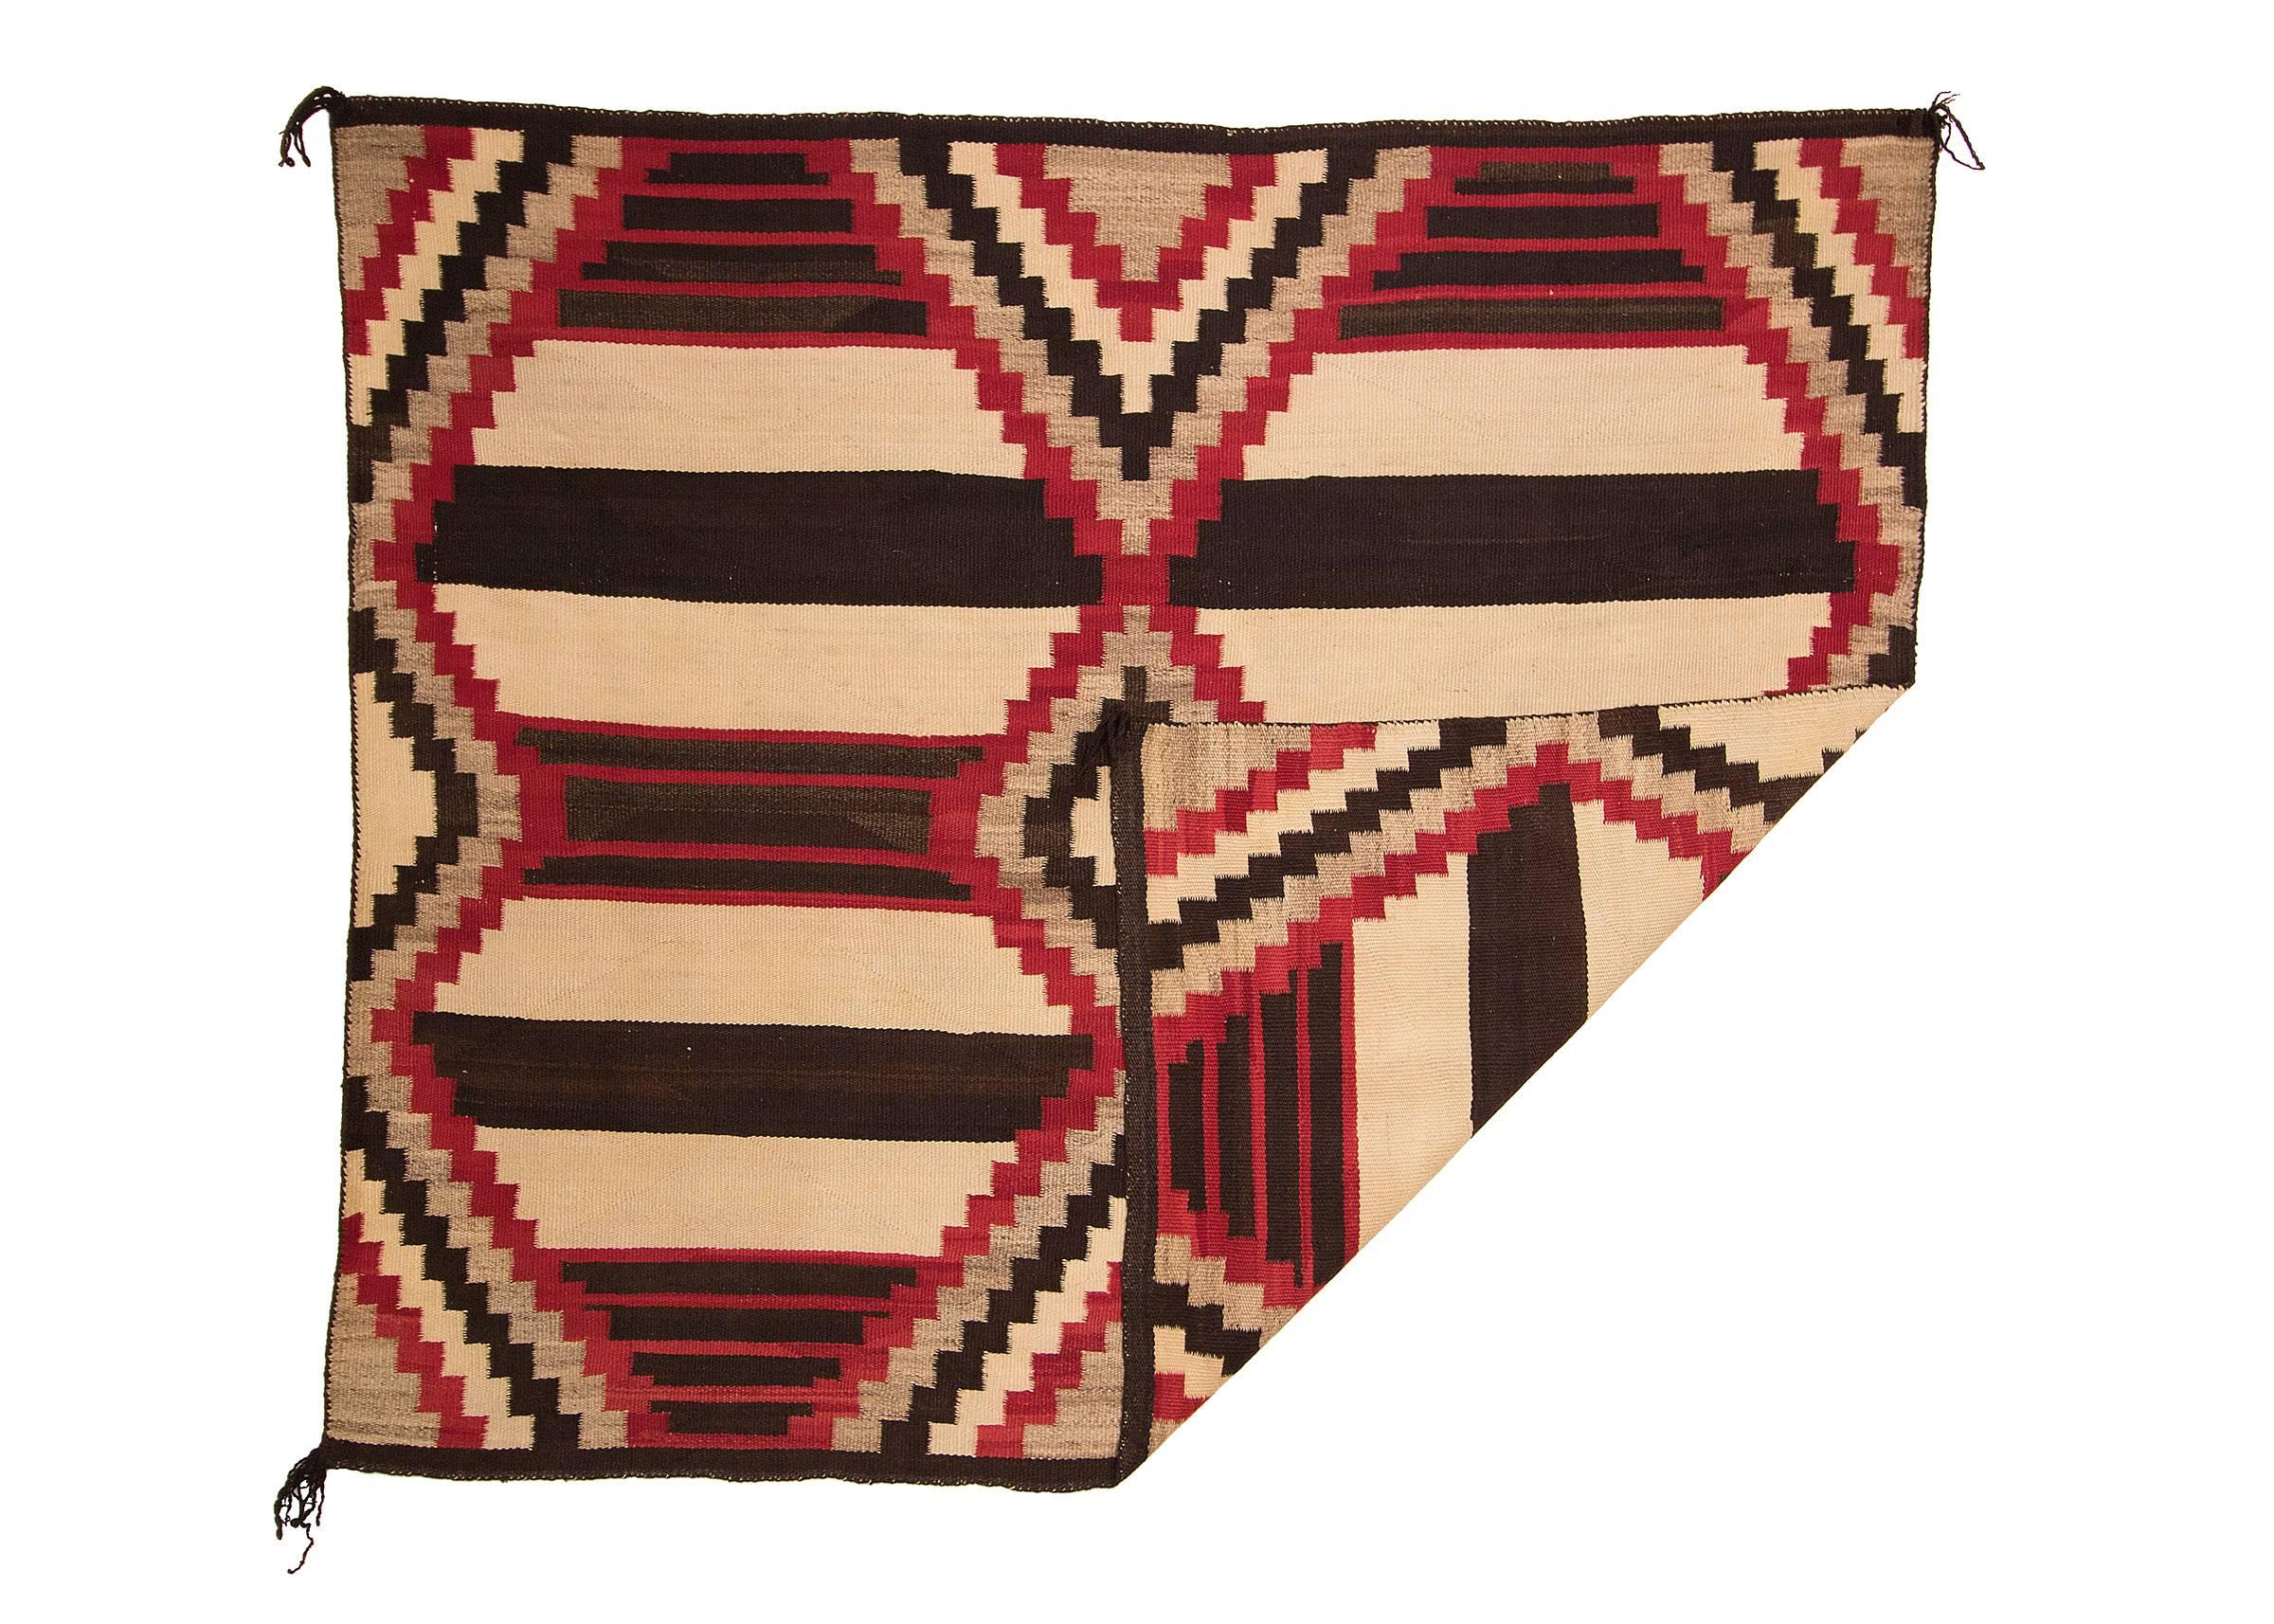 A Navajo chiefs blanket in a fourth phase/variant pattern. Woven of native hand-spun wool in natural ivory, dark brown and grey fleece with aniline dyed red in a variant of the nine-point chief's pattern against a Classic banded ground.

This